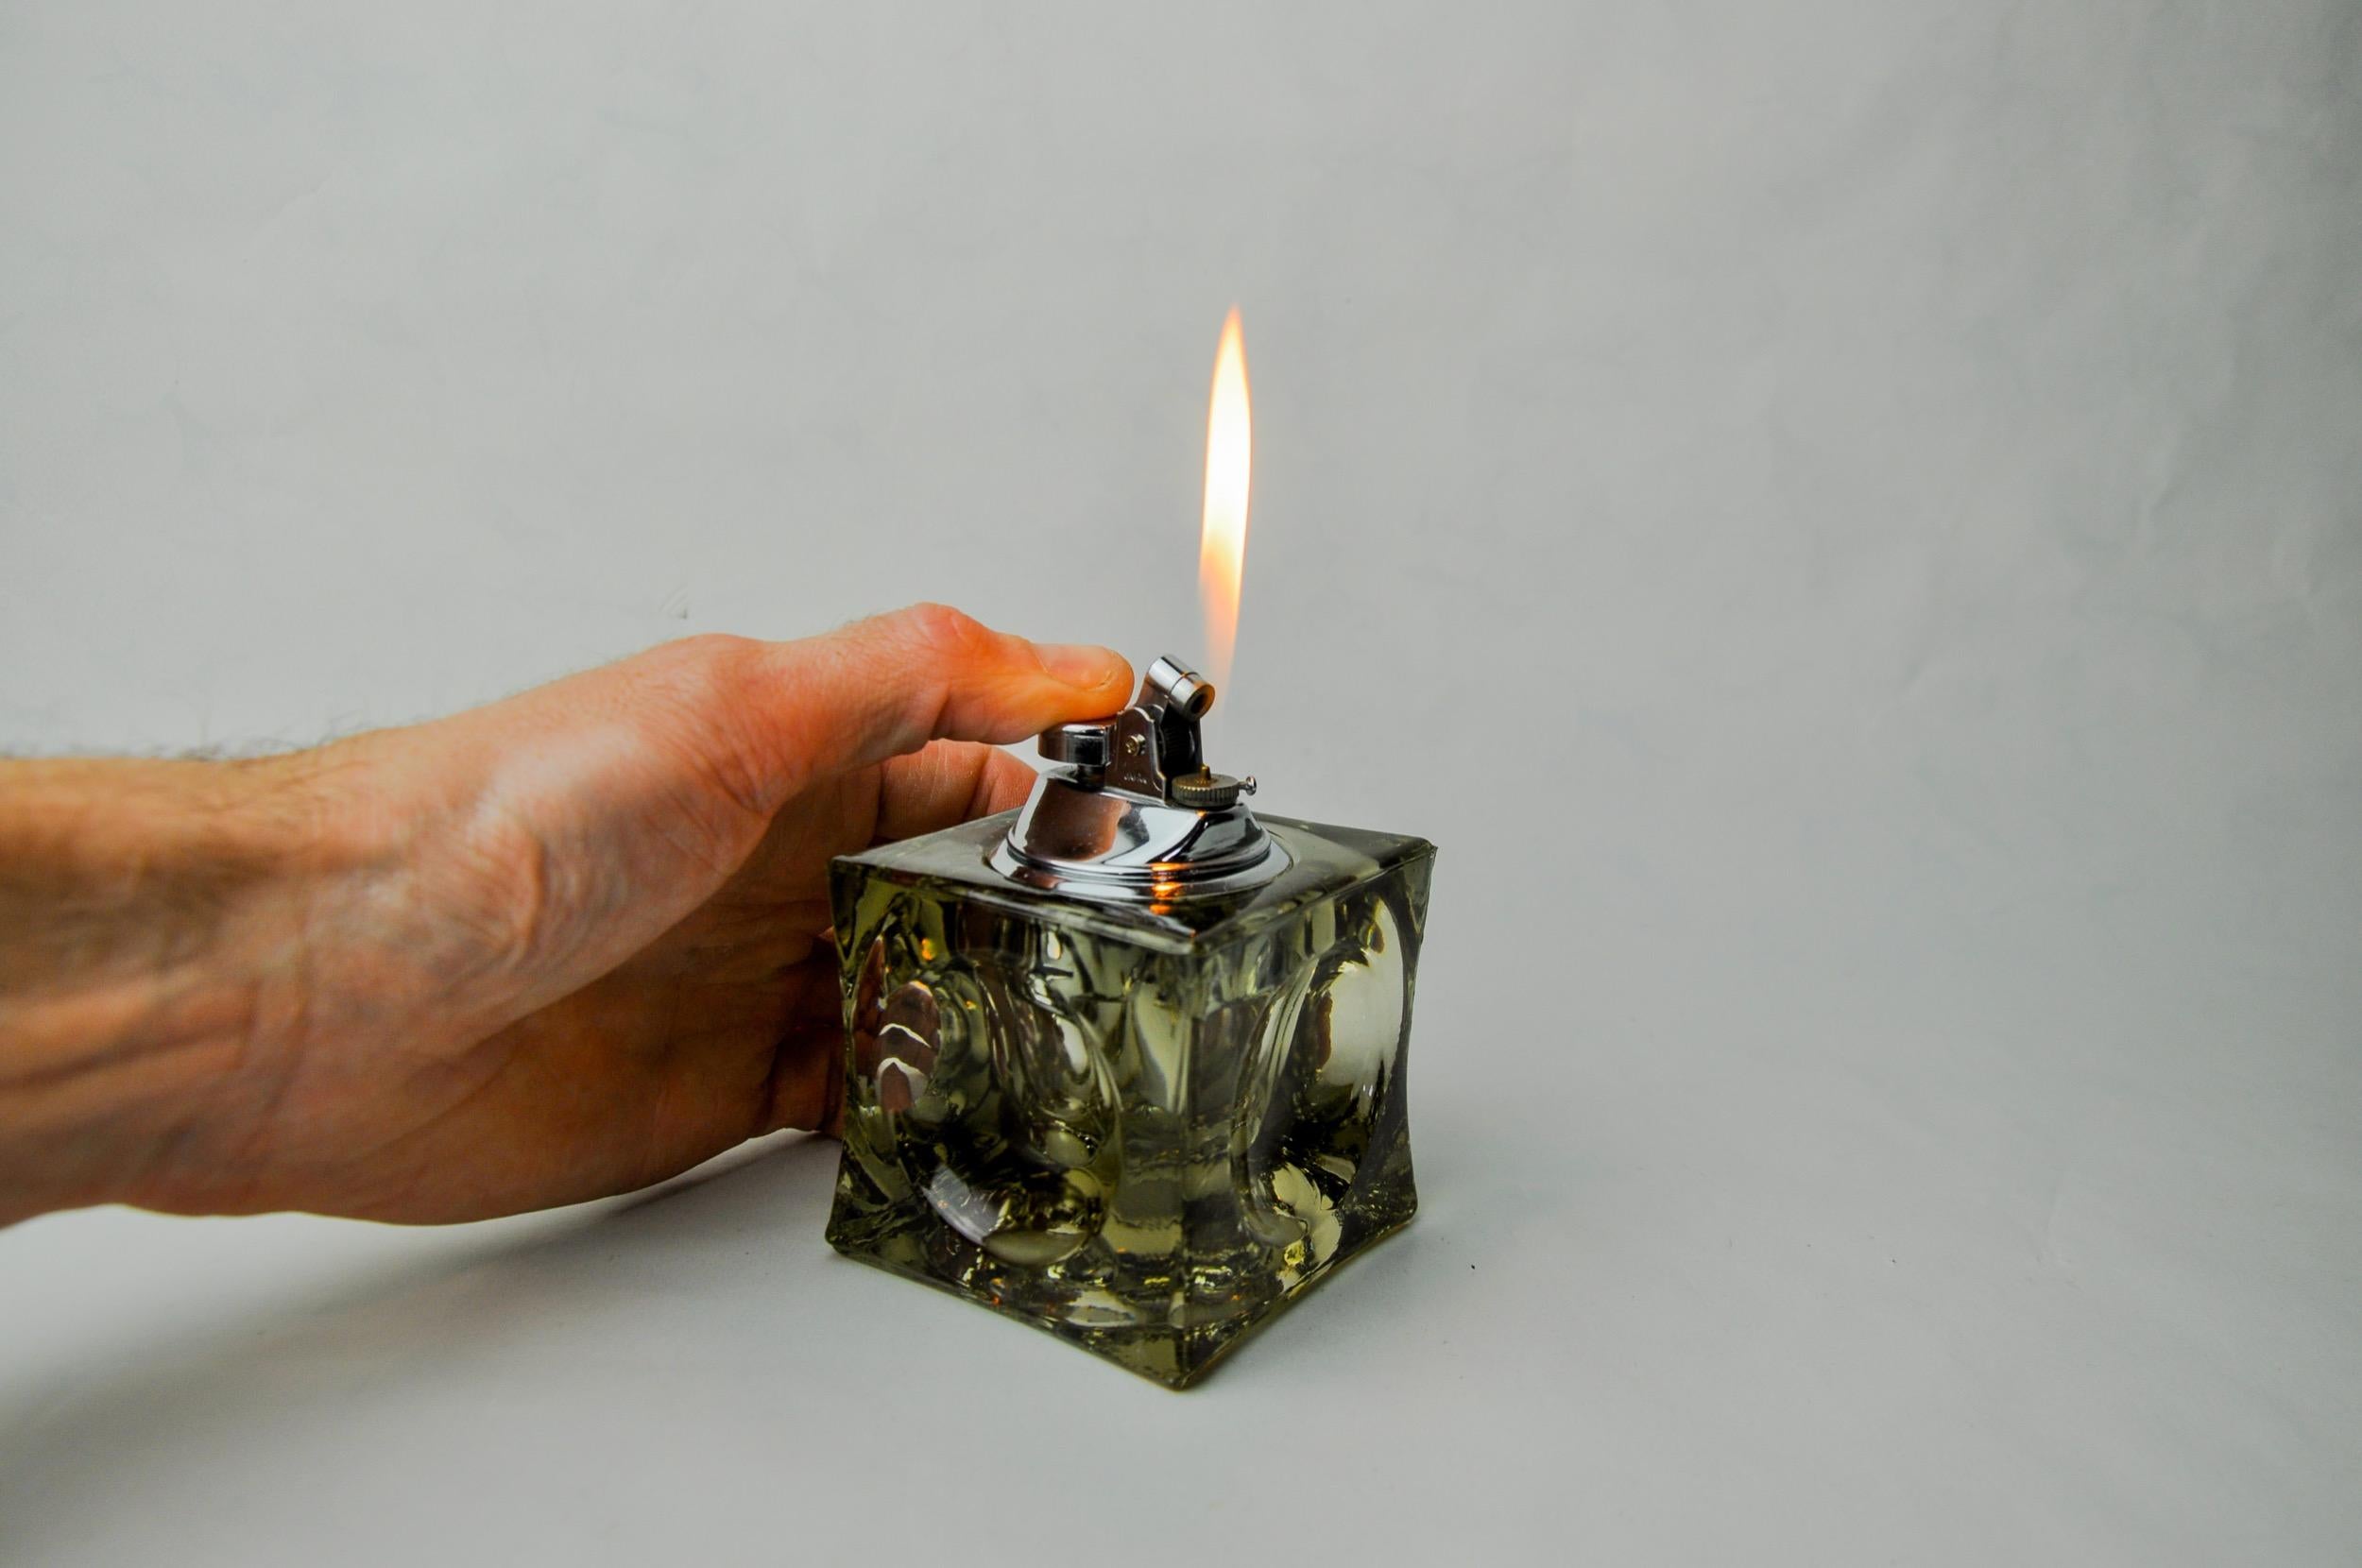 Superb and rare magnifying lighter designed and produced by Antonio Imperatore in Italy in the 1970s. Black Murano glass lighter with a magnifying effect on its facets, handcrafted by Venetian master glassmakers. Decorative object that will bring a